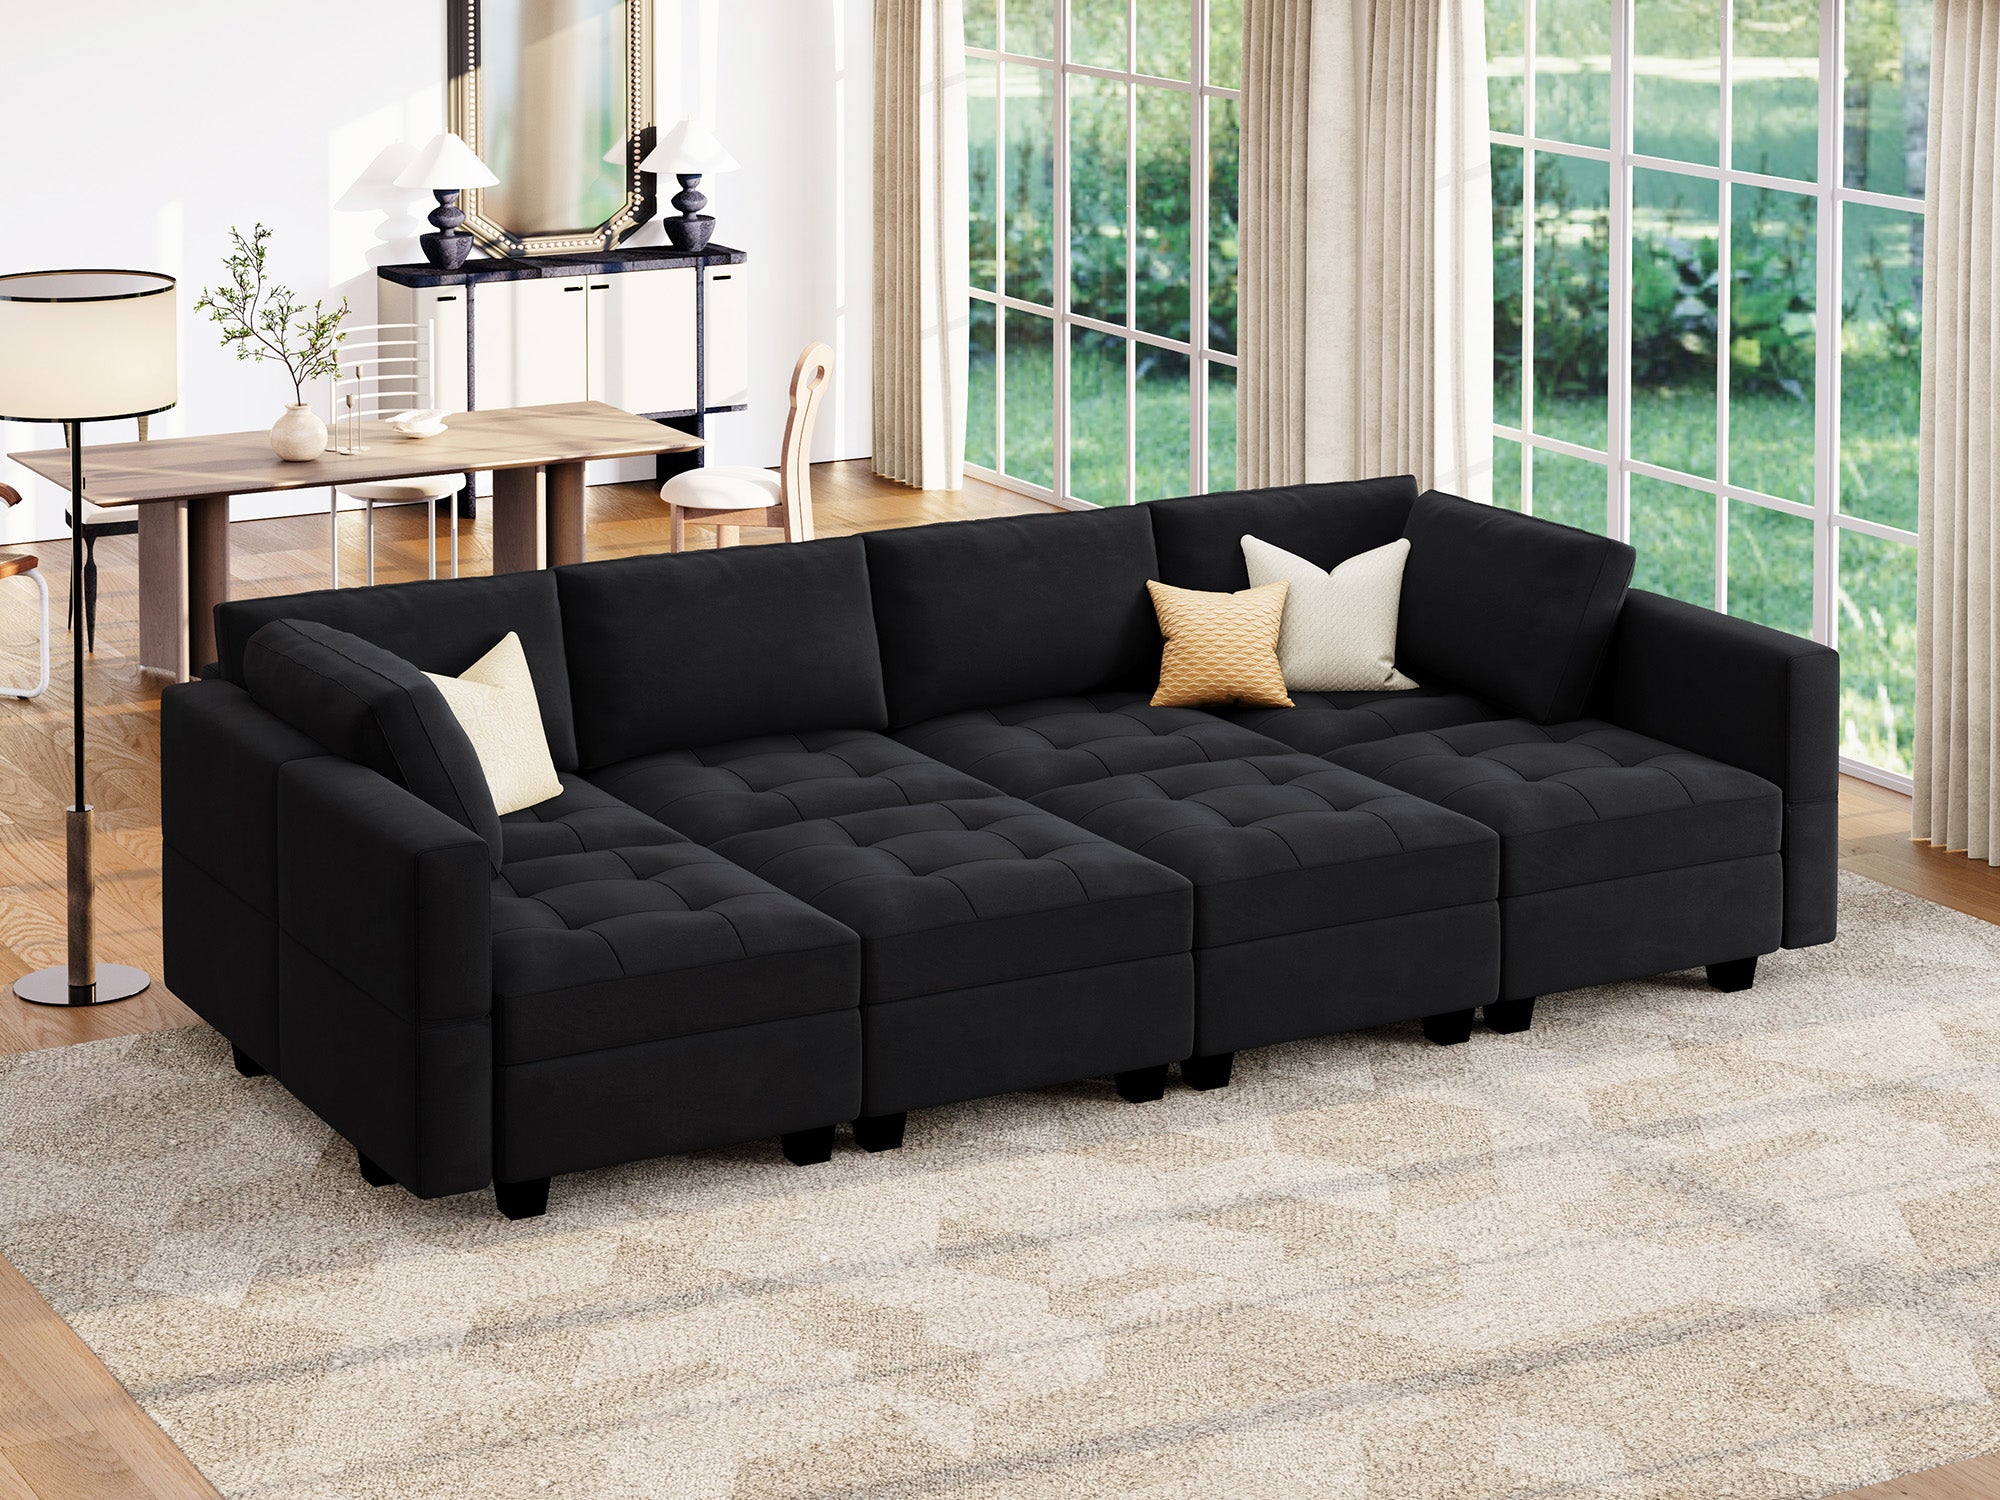 HONBAY Modular Sleeper Sectional Sofa Couch Storage Seat #Color_Black